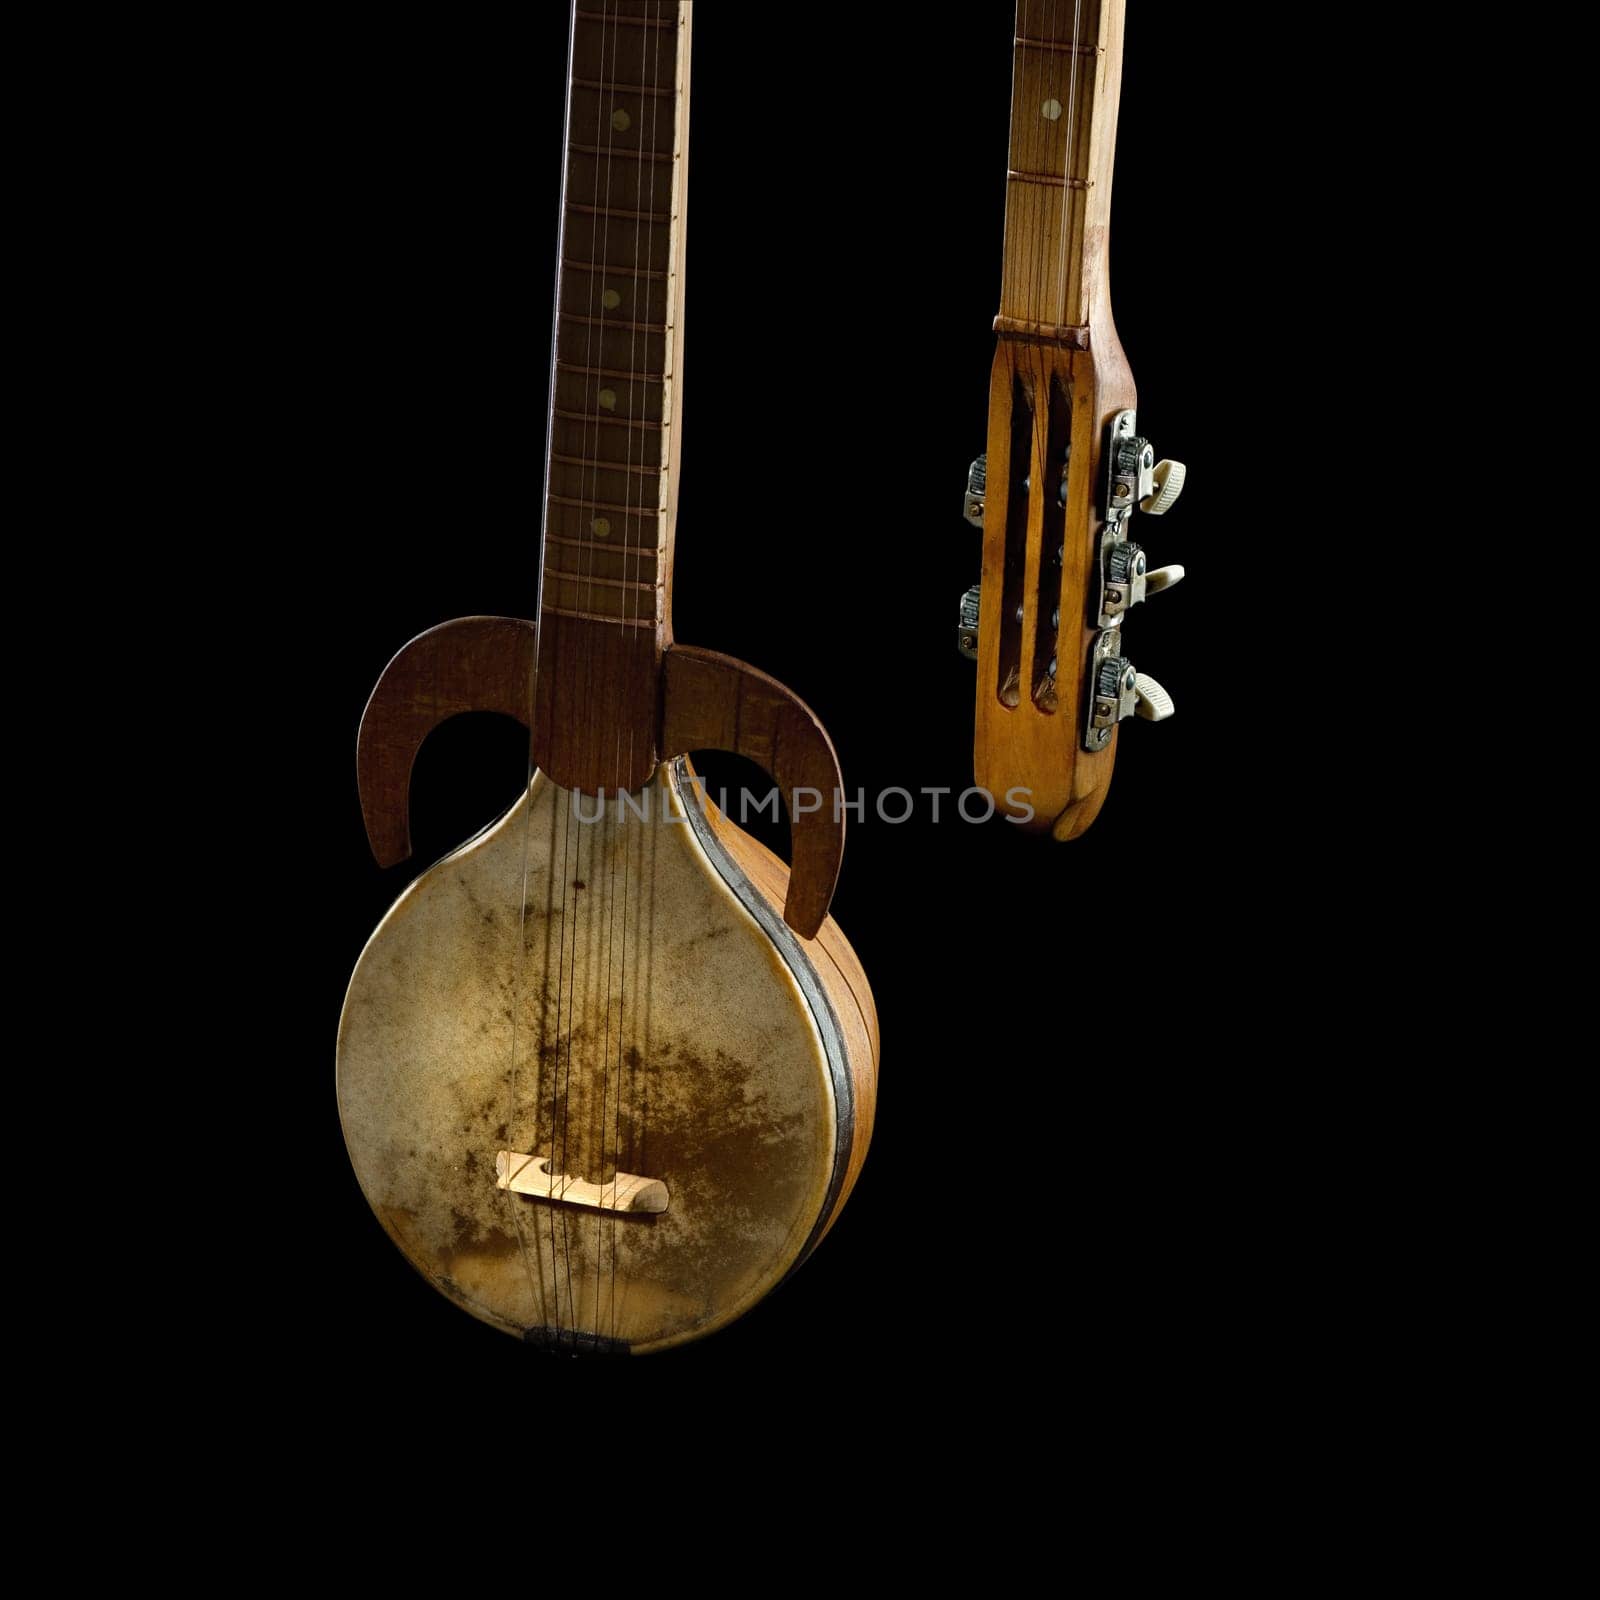 An ancient Asian stringed musical instrument on a black background